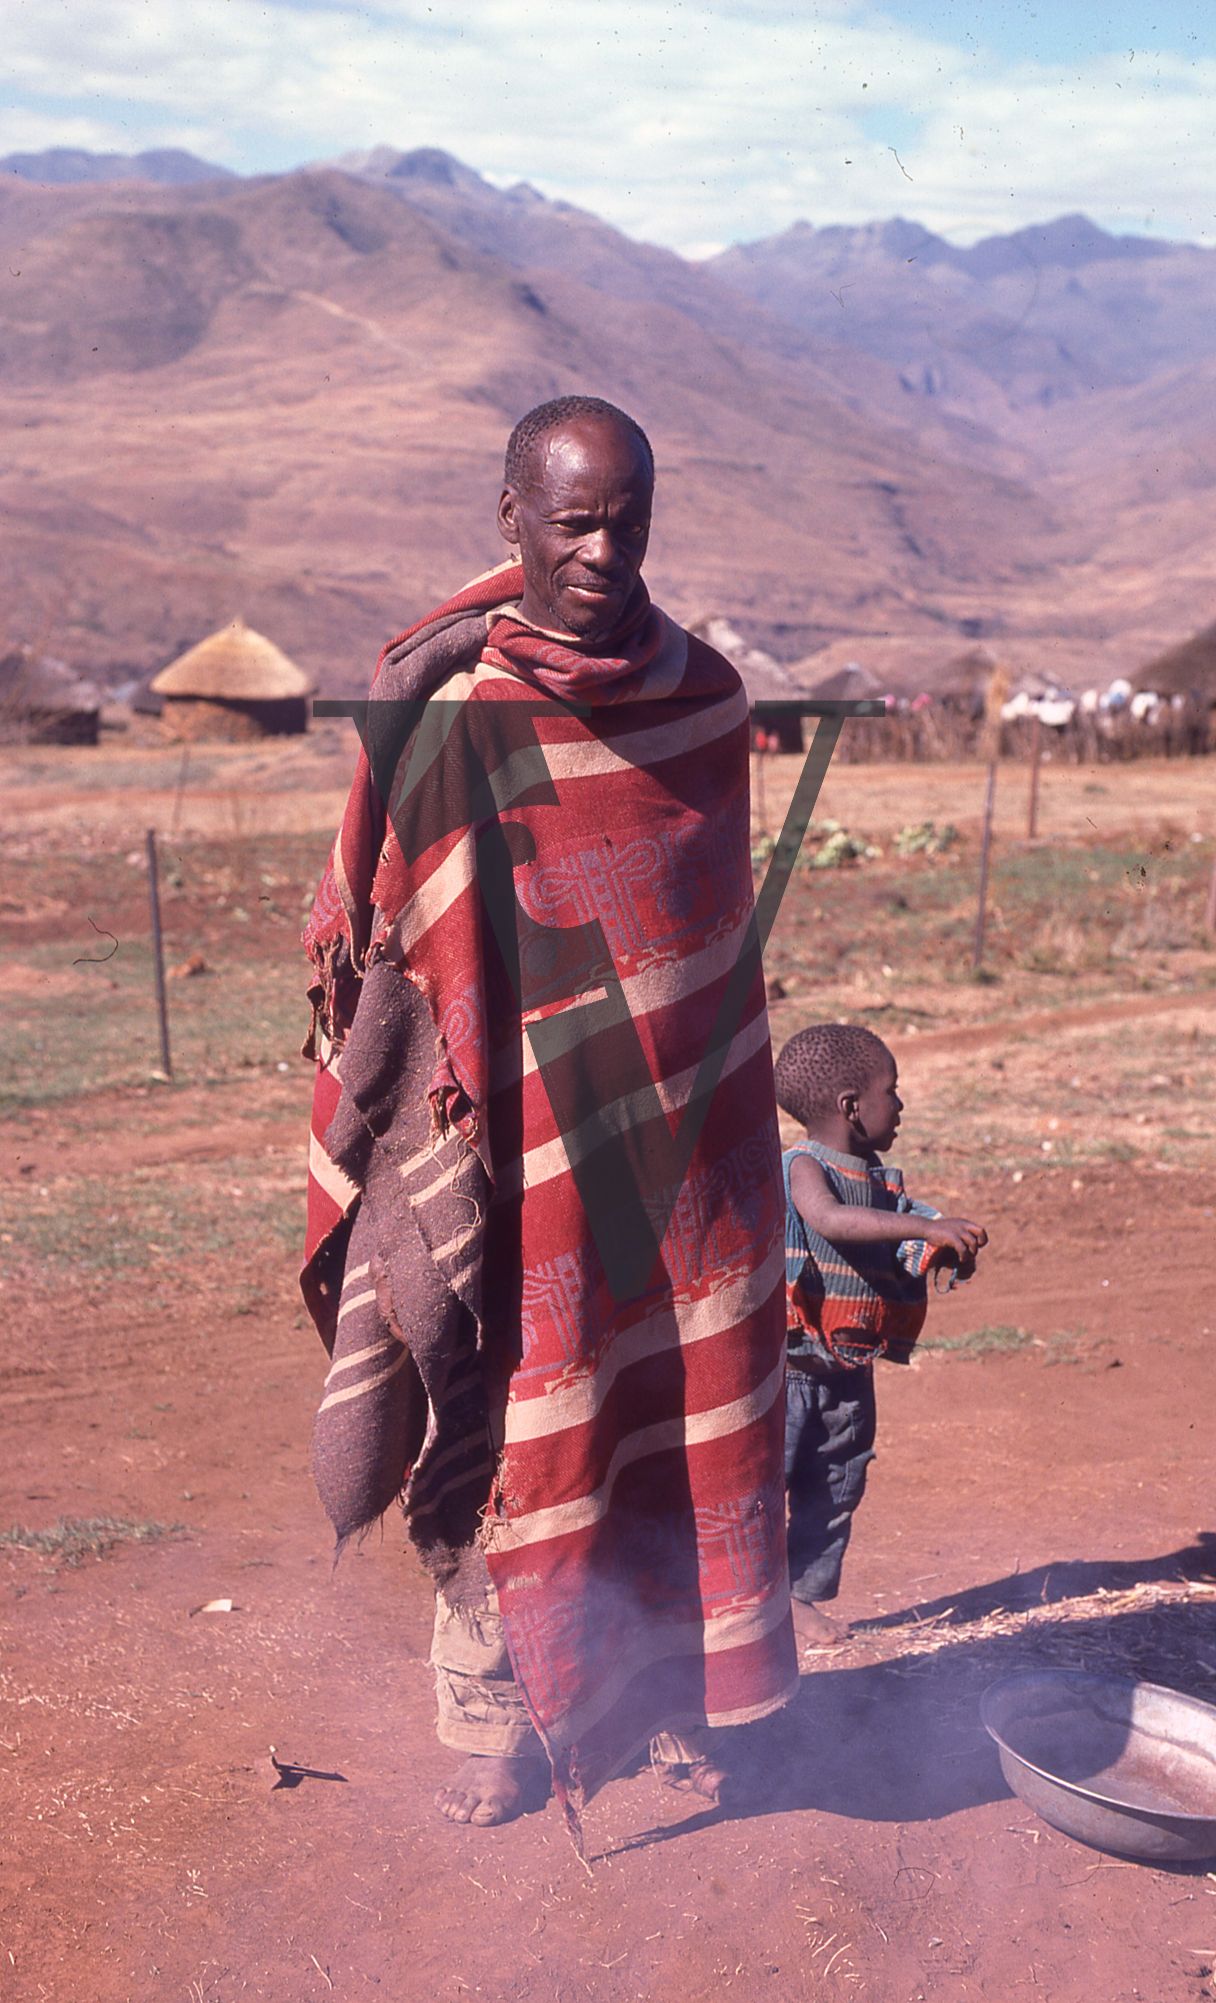 Lesotho, Handspun mohair farming community, man and child, stands at camera, portrait.